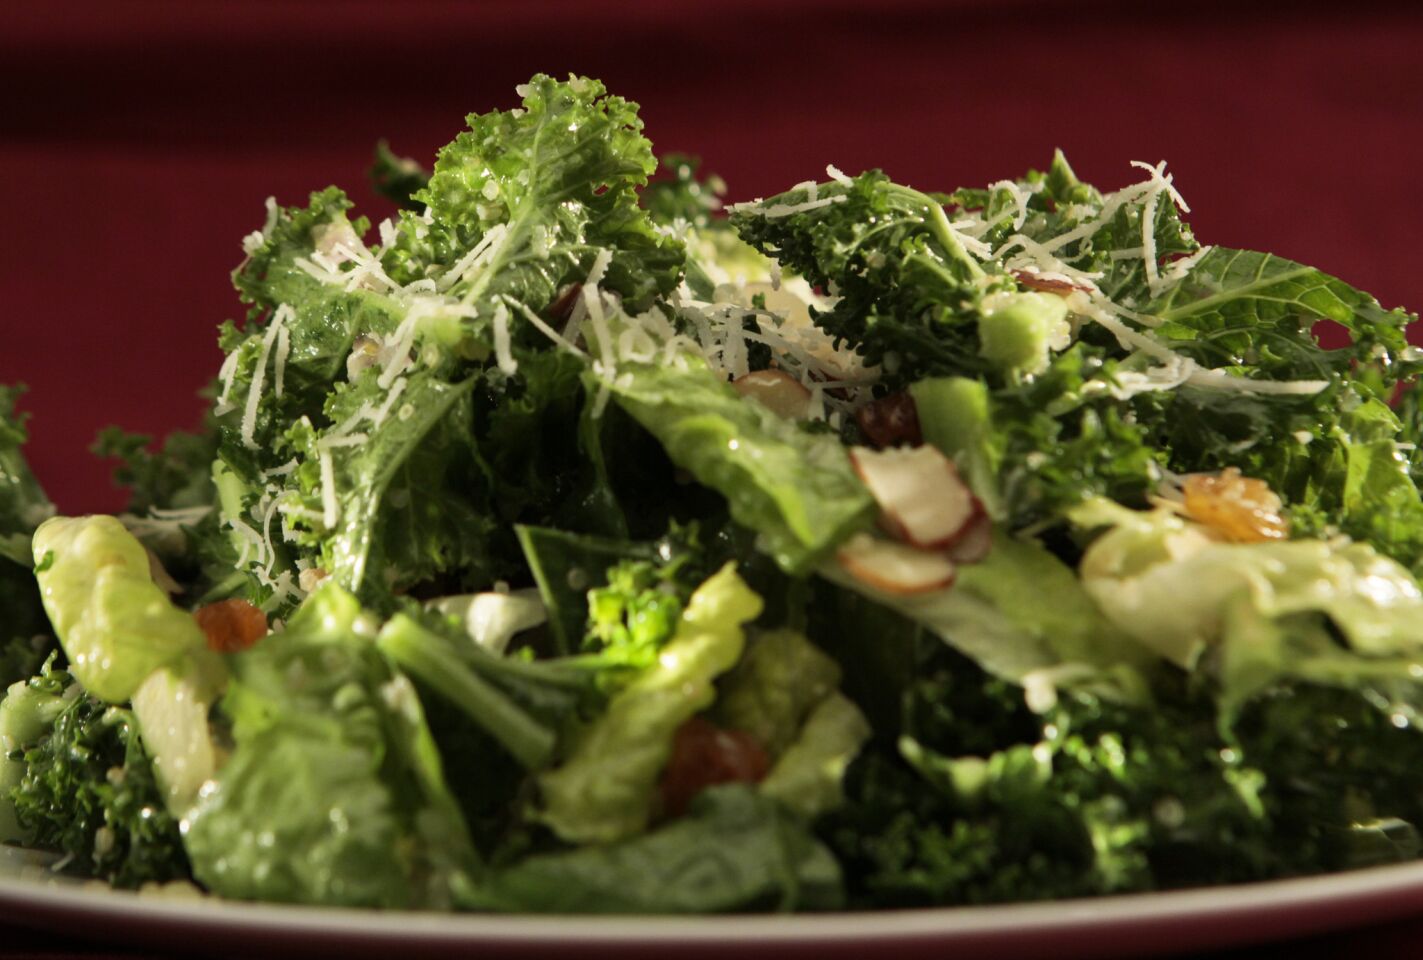 The kale salad from Napa Valley Grille.